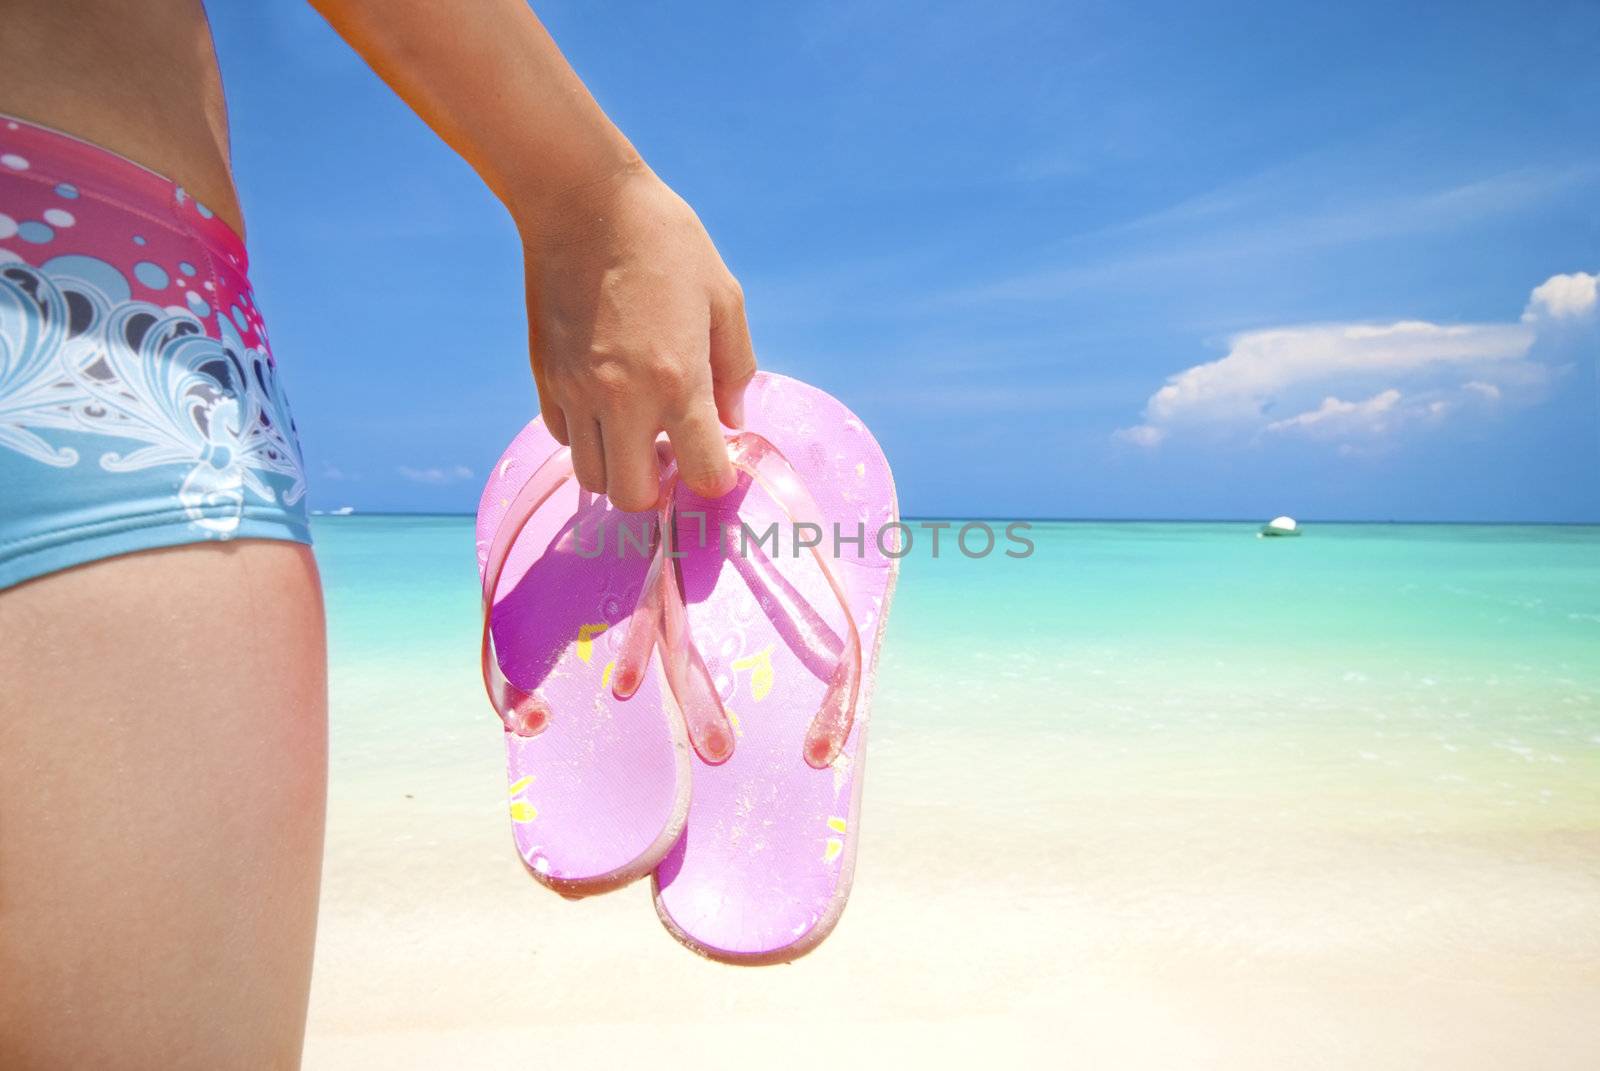 asian girl on a beach holding slipper with copyspace on right